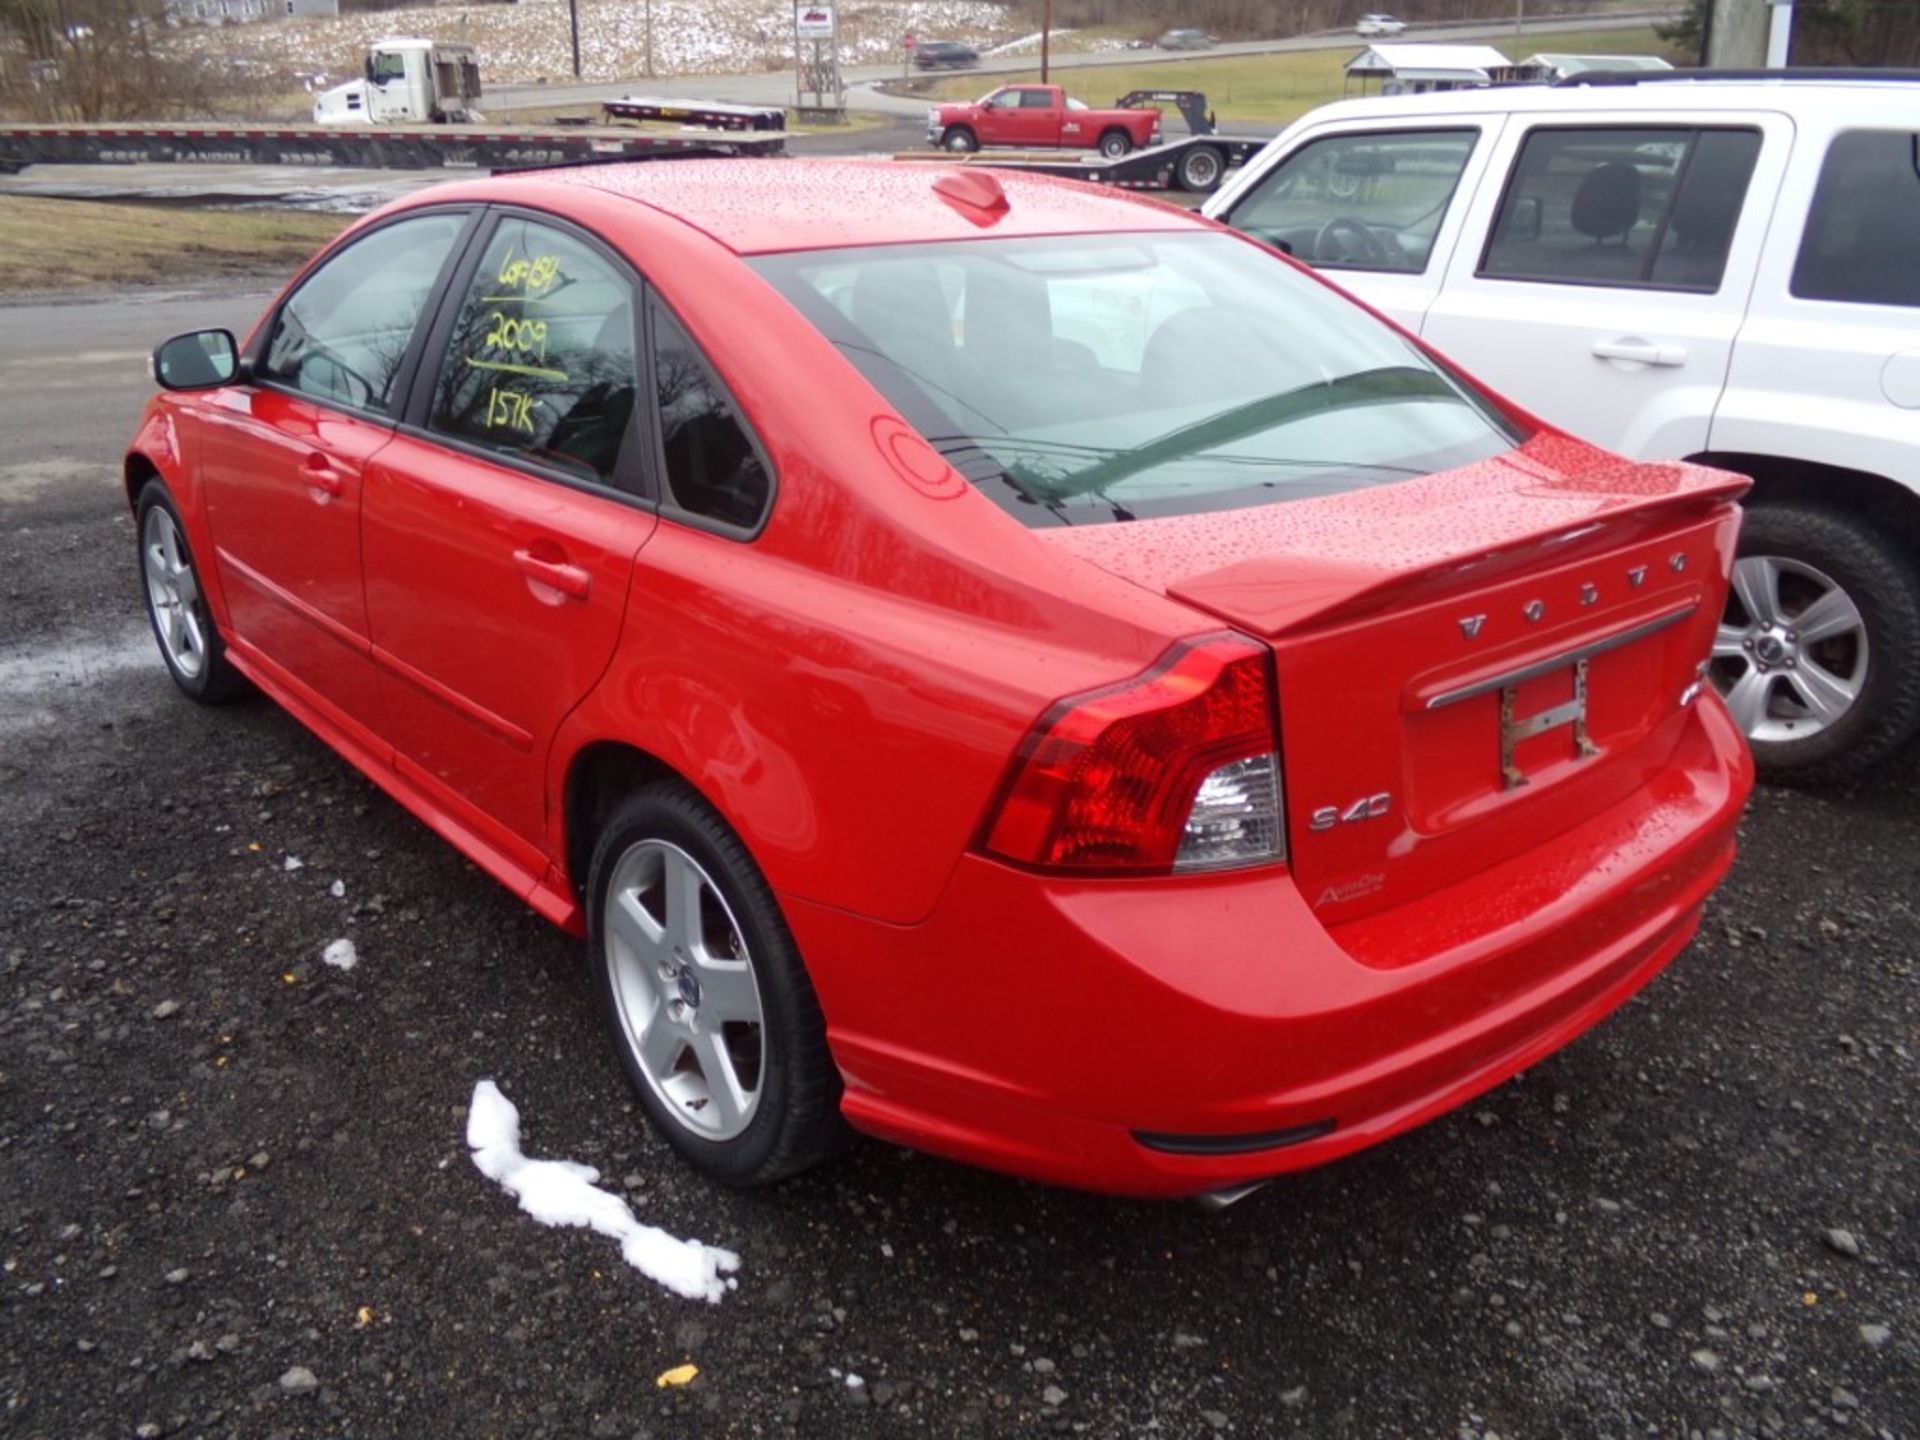 2009 Volvo S40 T5, AWD, Red, Leather, Sunroof, 157,030 Miles, VIN#: YV1MH672192449641,SMALL DENT L/S - Image 2 of 4